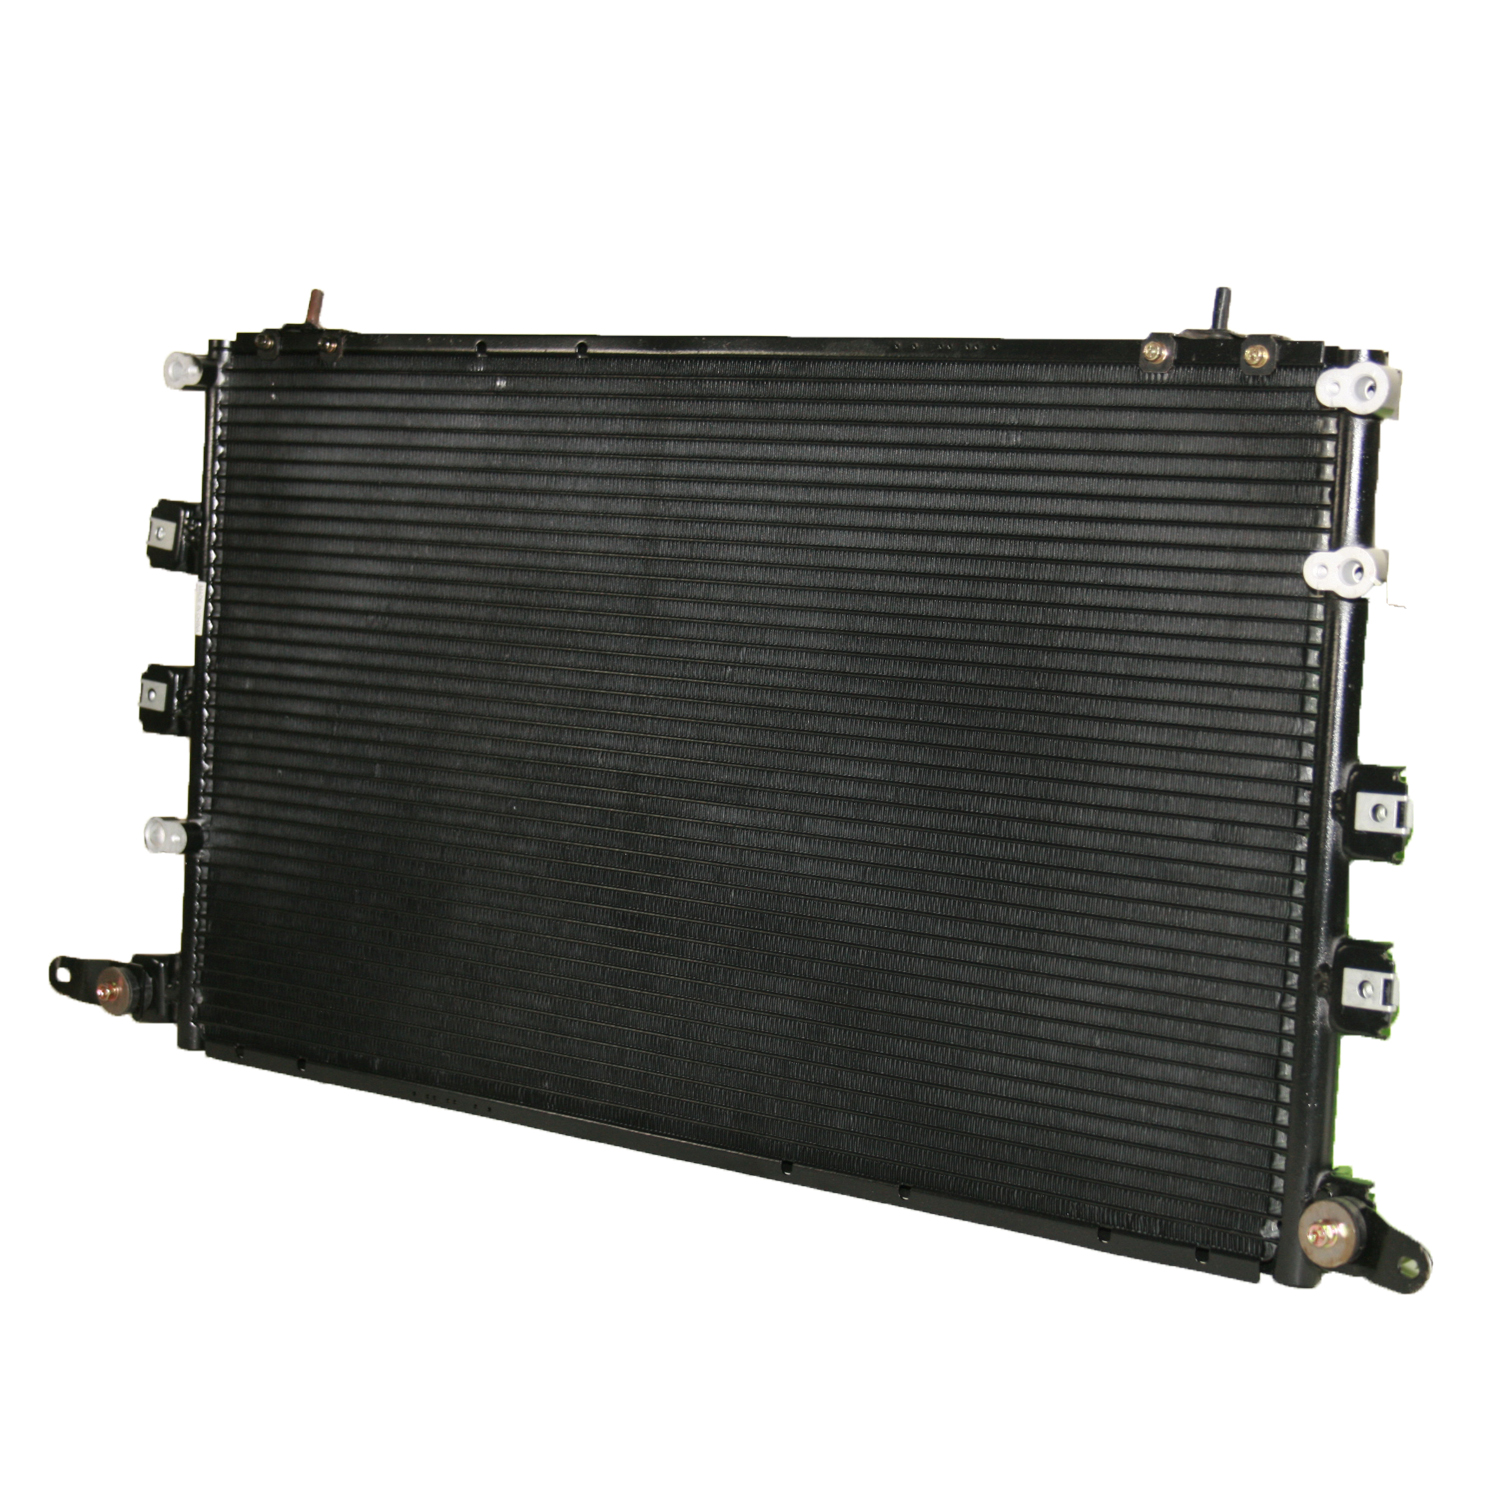 TCW Condenser 44-3042 New Product Image field_60b6a13a6e67c